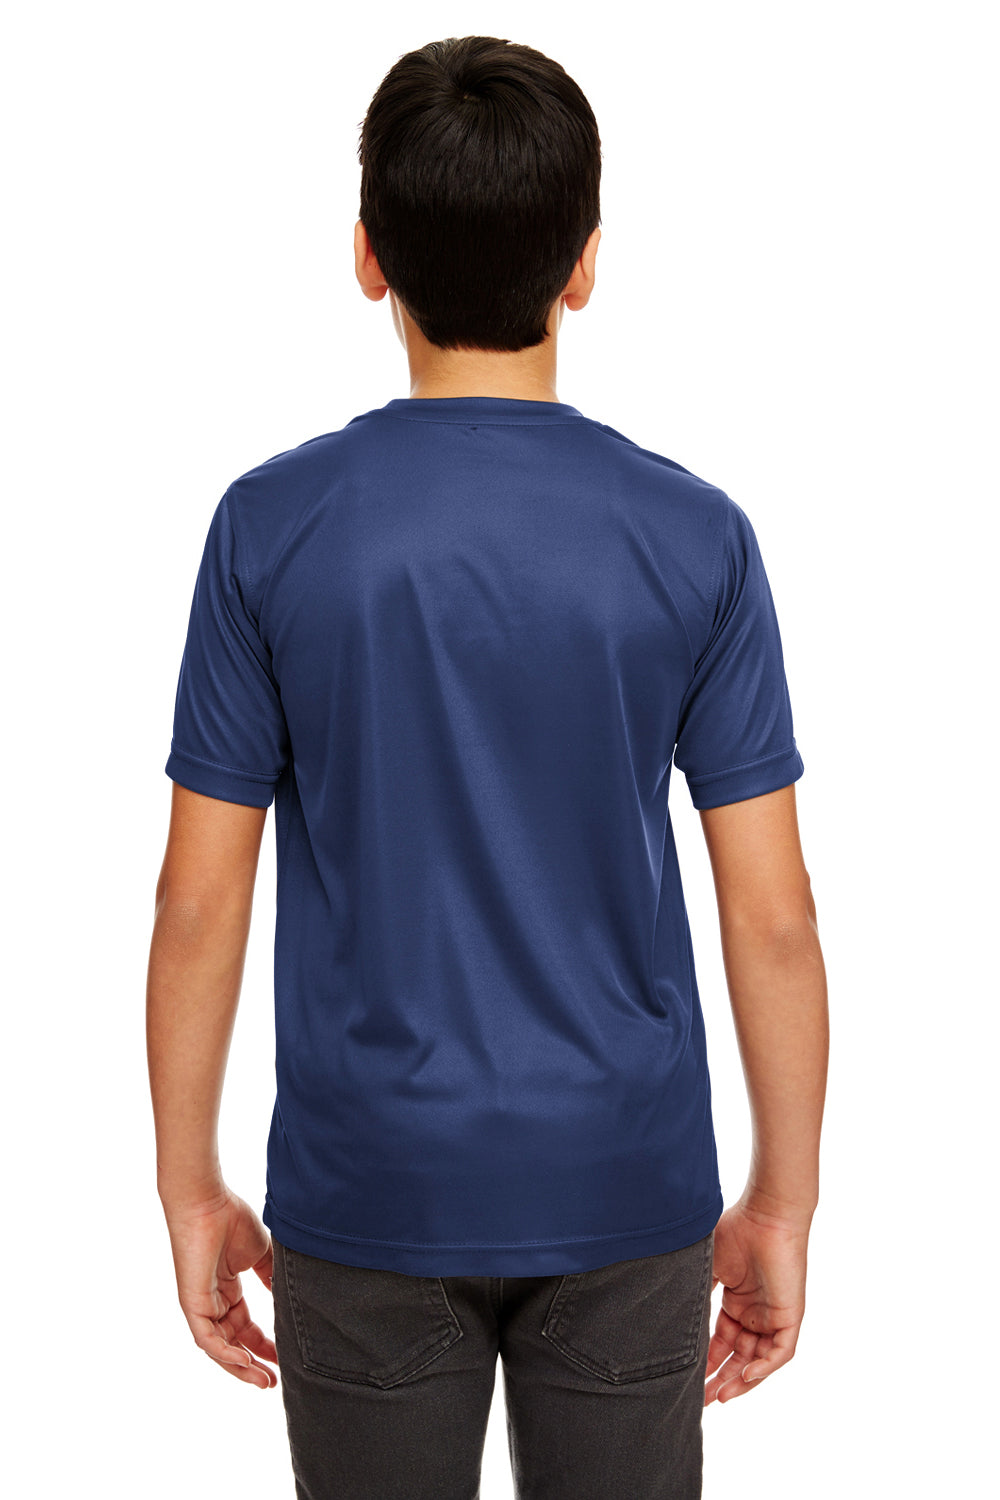 UltraClub 8420Y Youth Cool & Dry Performance Moisture Wicking Short Sleeve Crewneck T-Shirt Navy Blue Back